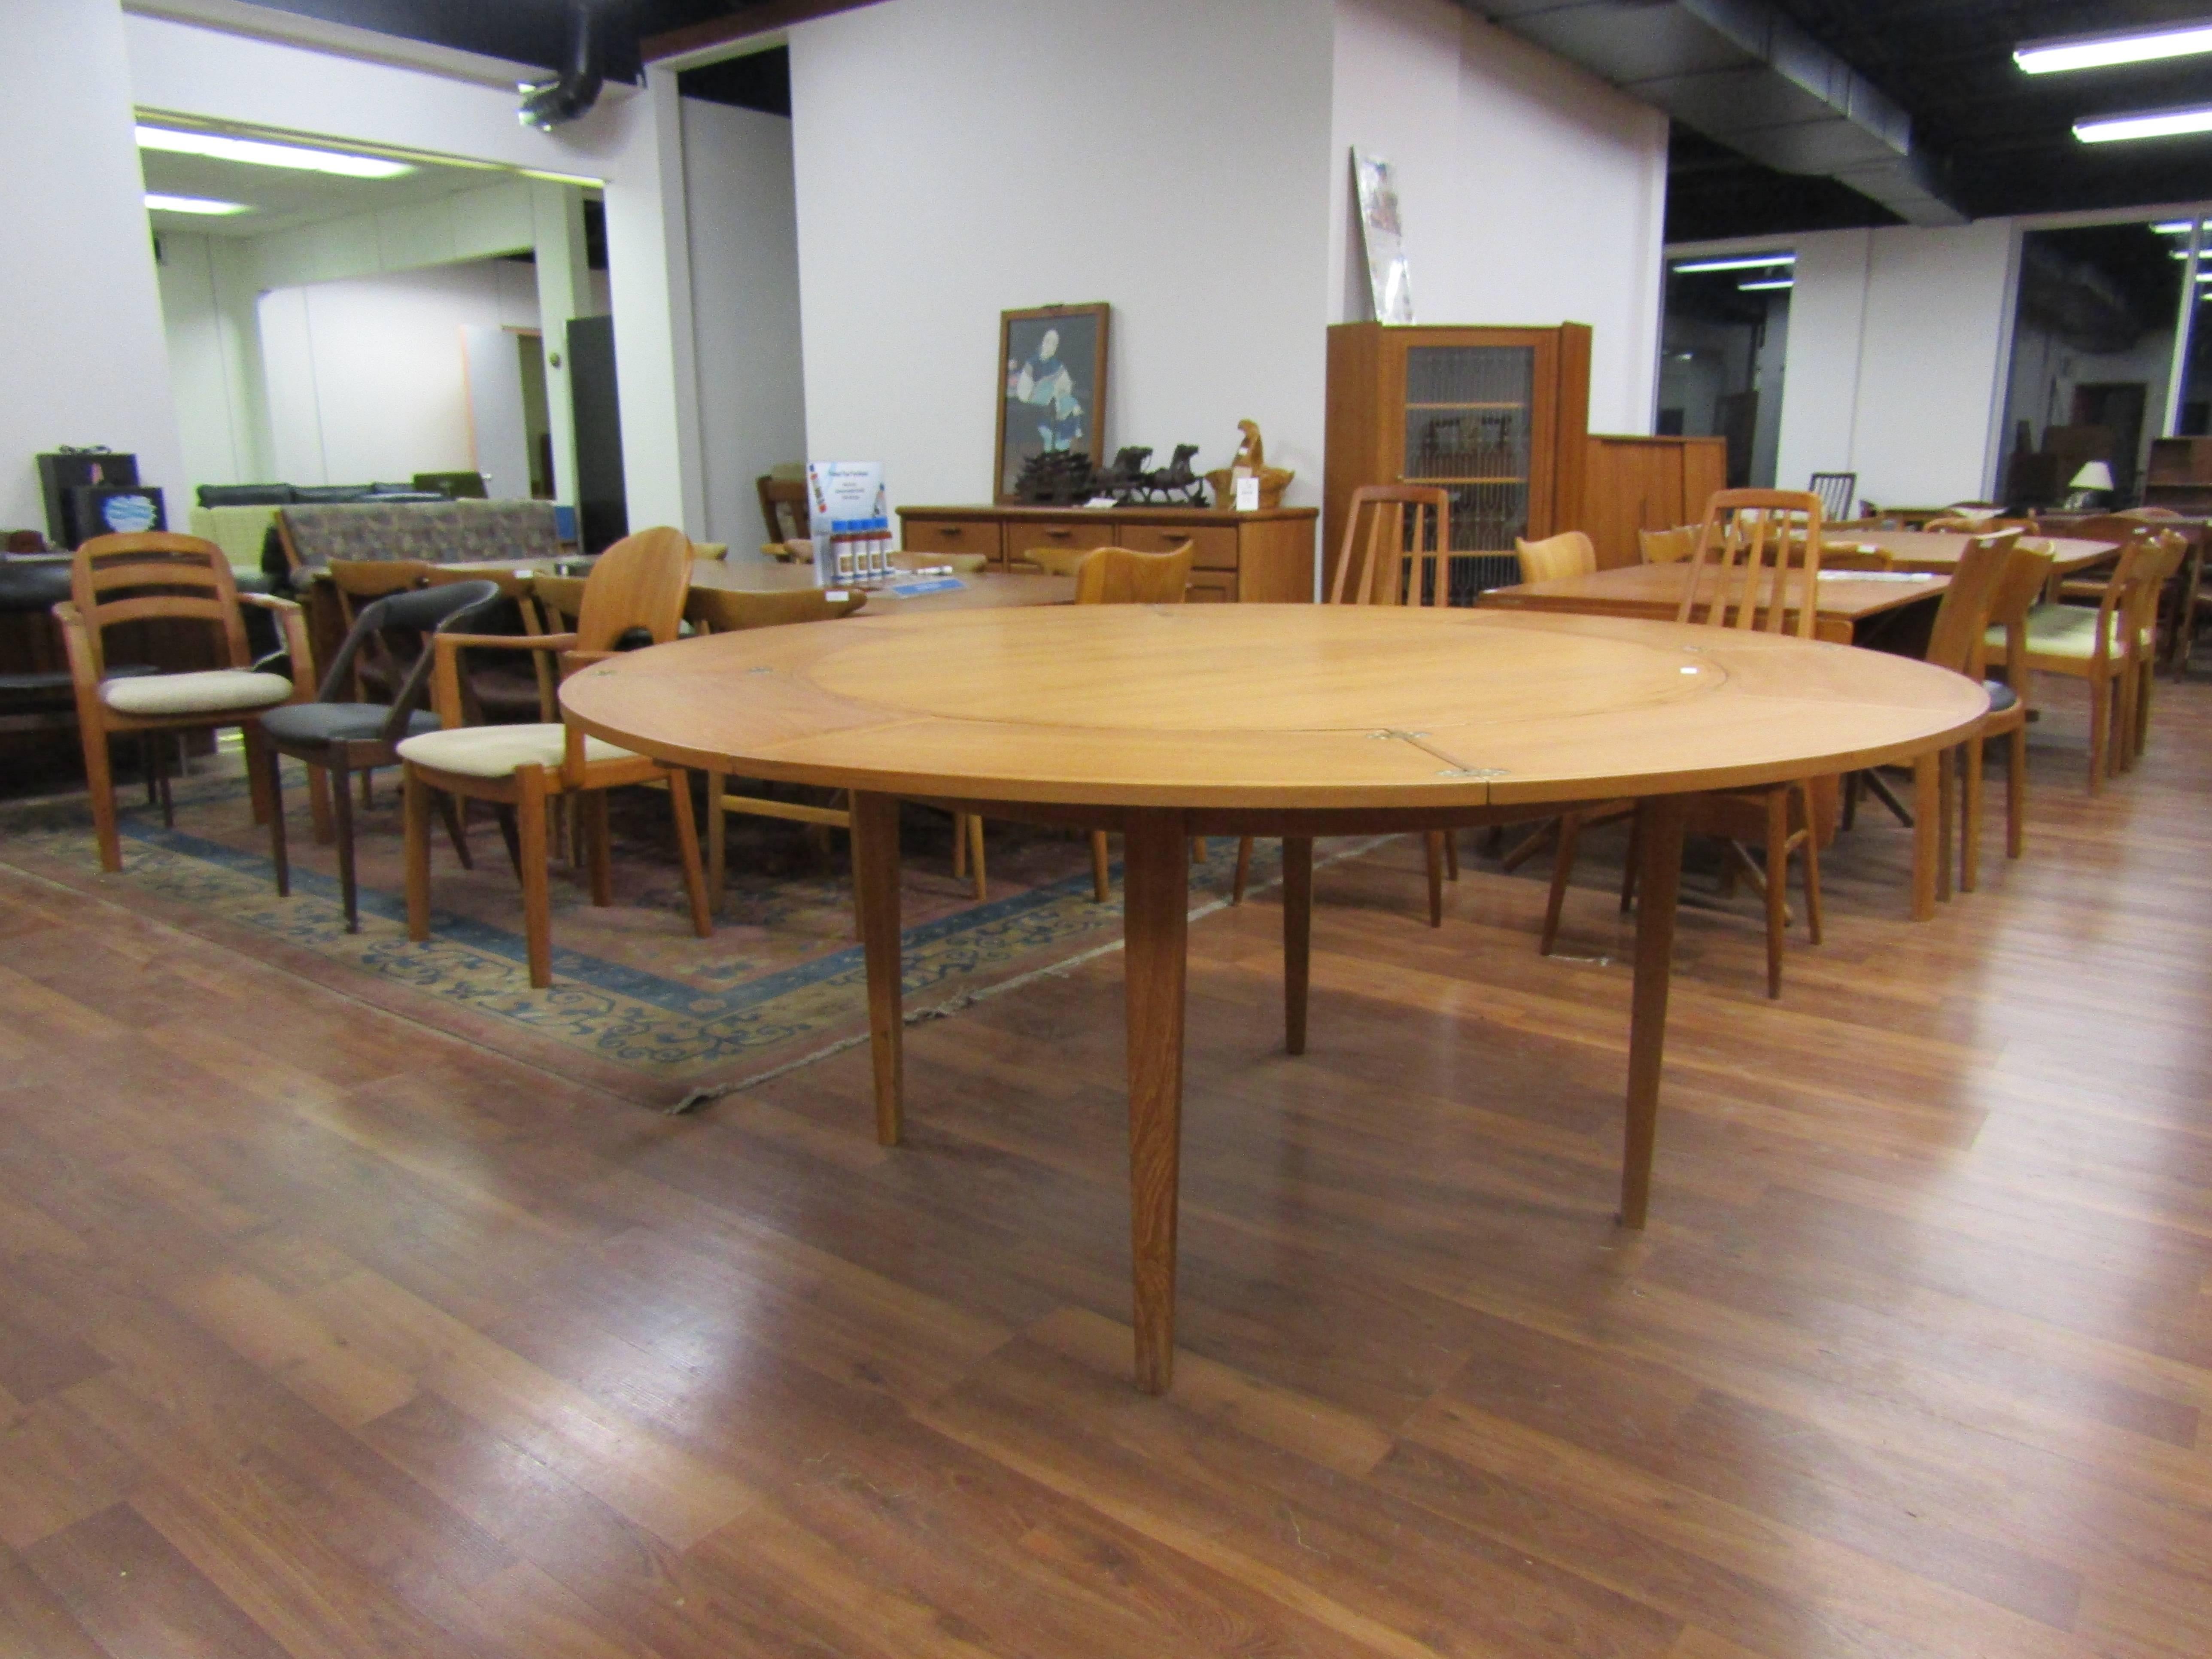 Kofoed Teak Flip Flap Dining Table from Denmark In Excellent Condition For Sale In Ottawa, ON